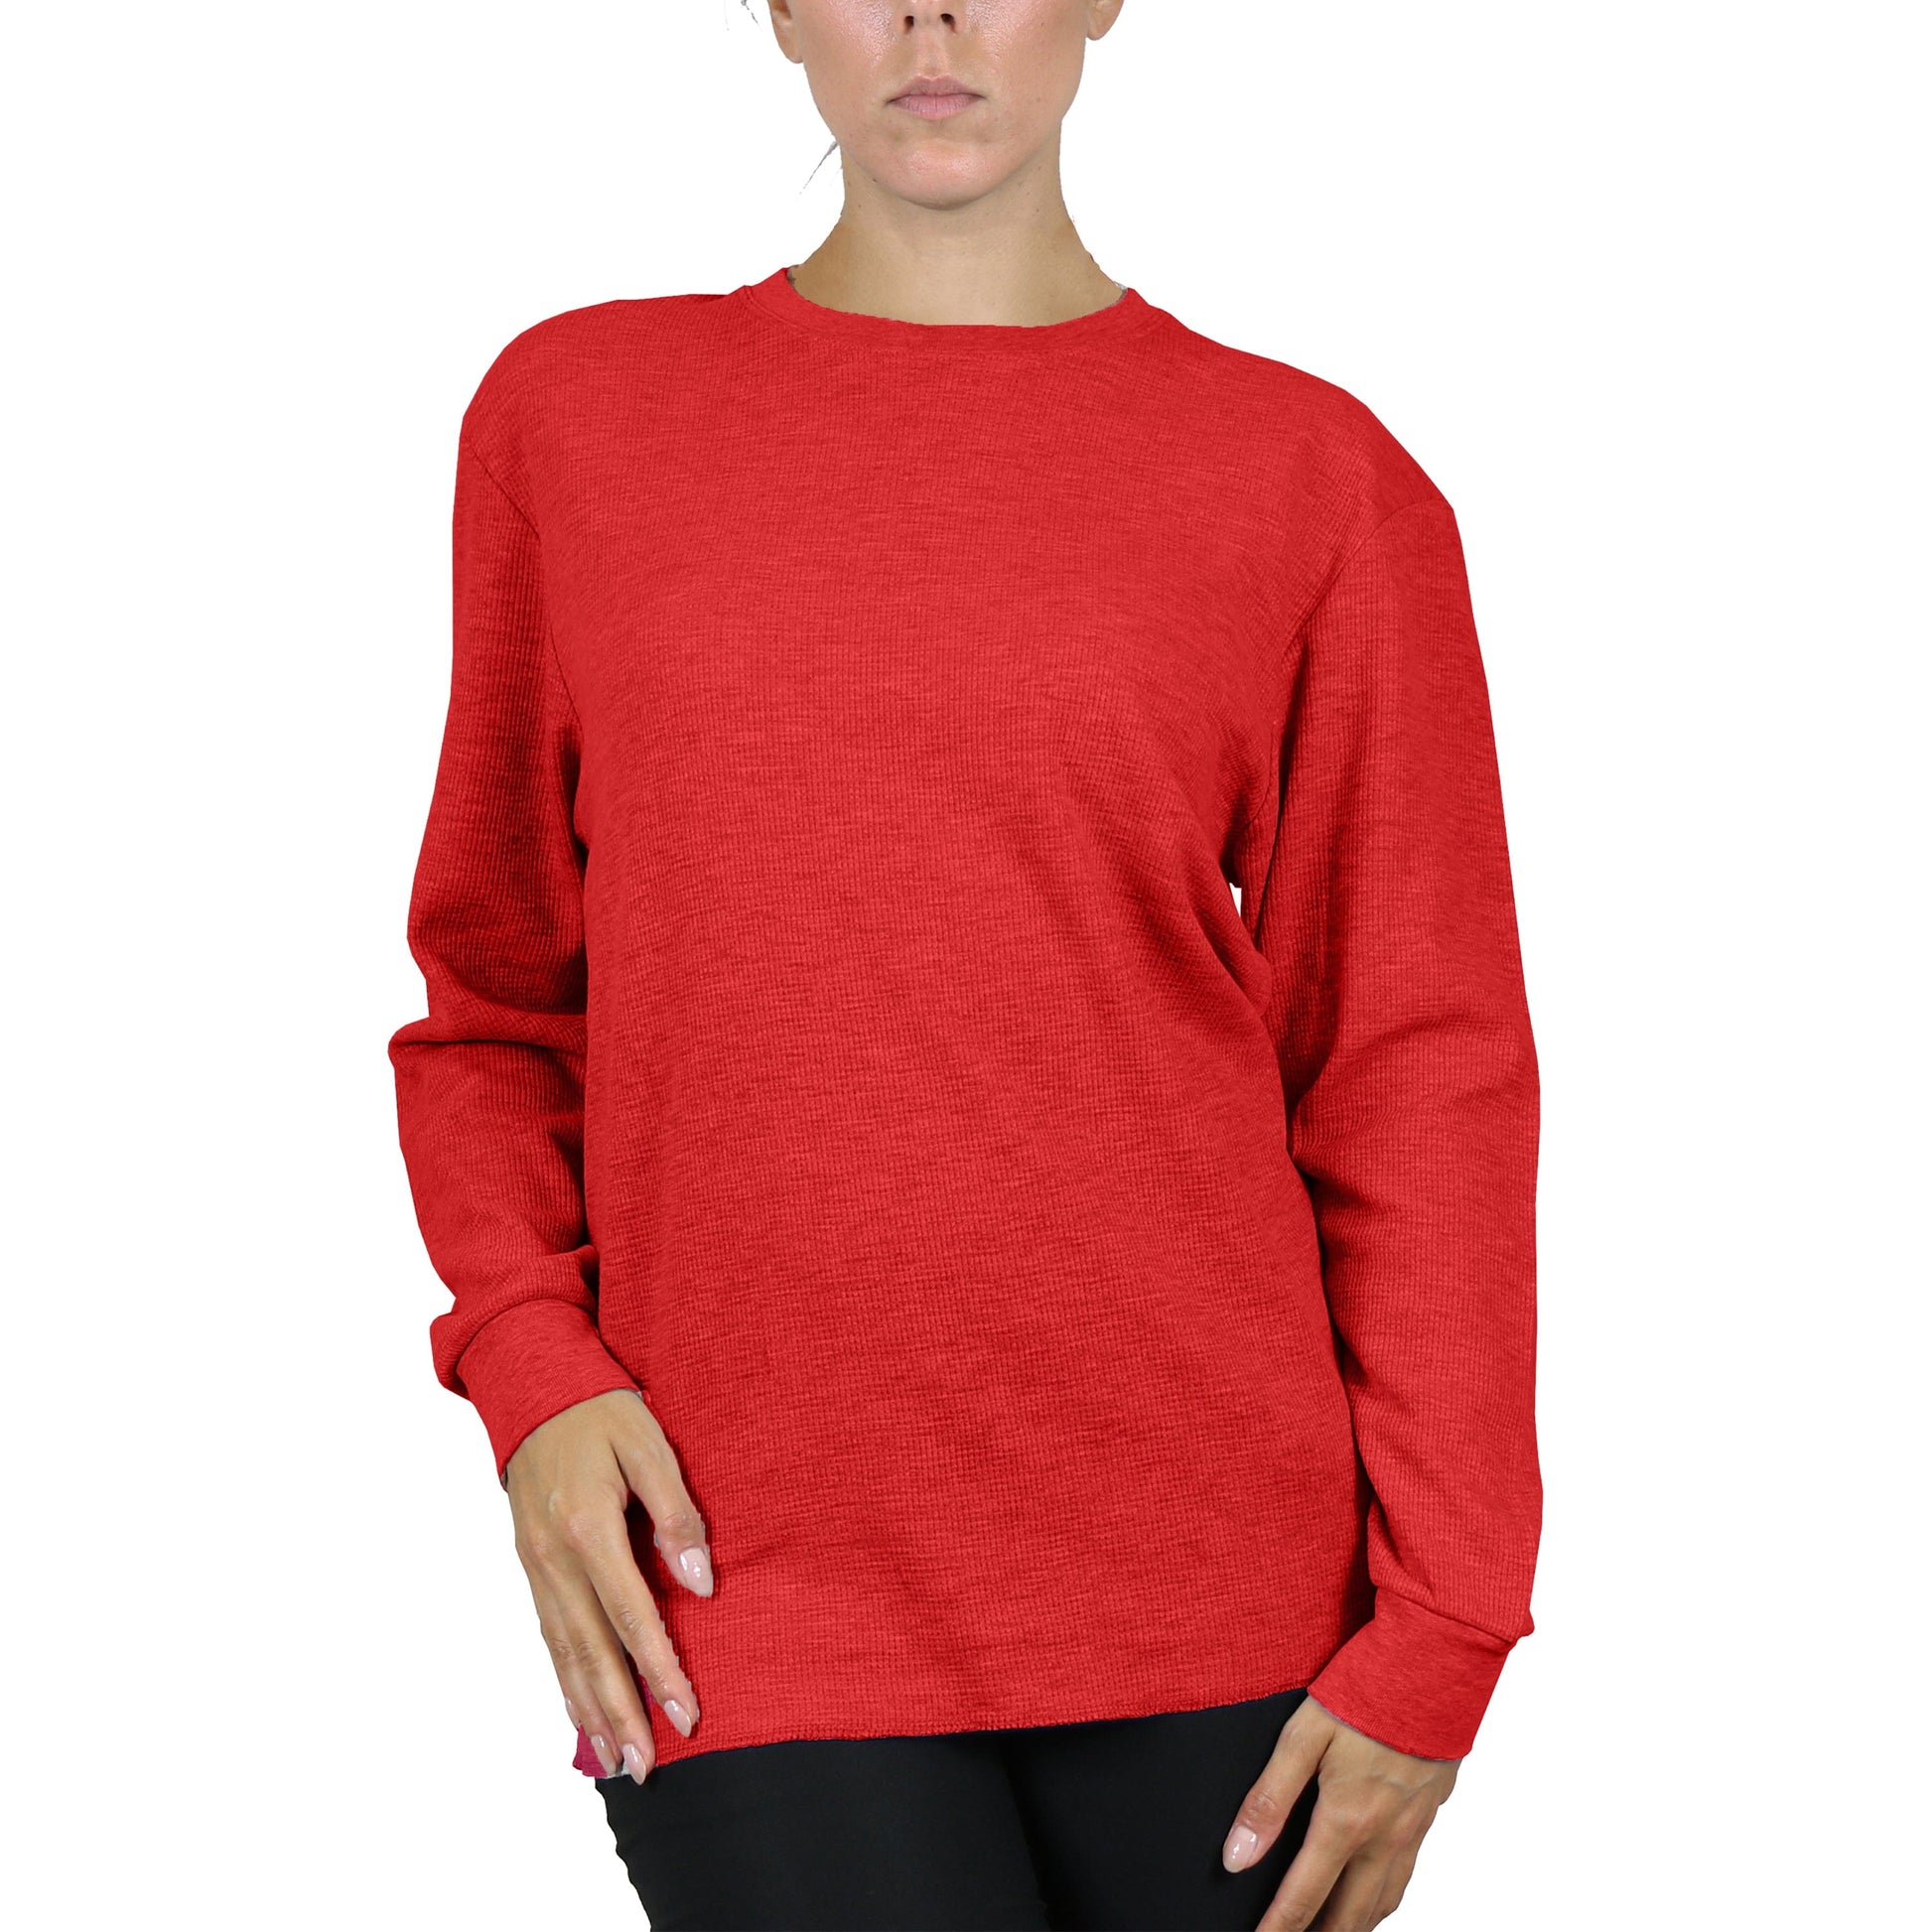 Women's Long Sleeve Oversize Loose Fit Thermal Shirts (Sizes, S-5XL) –  GalaxybyHarvic